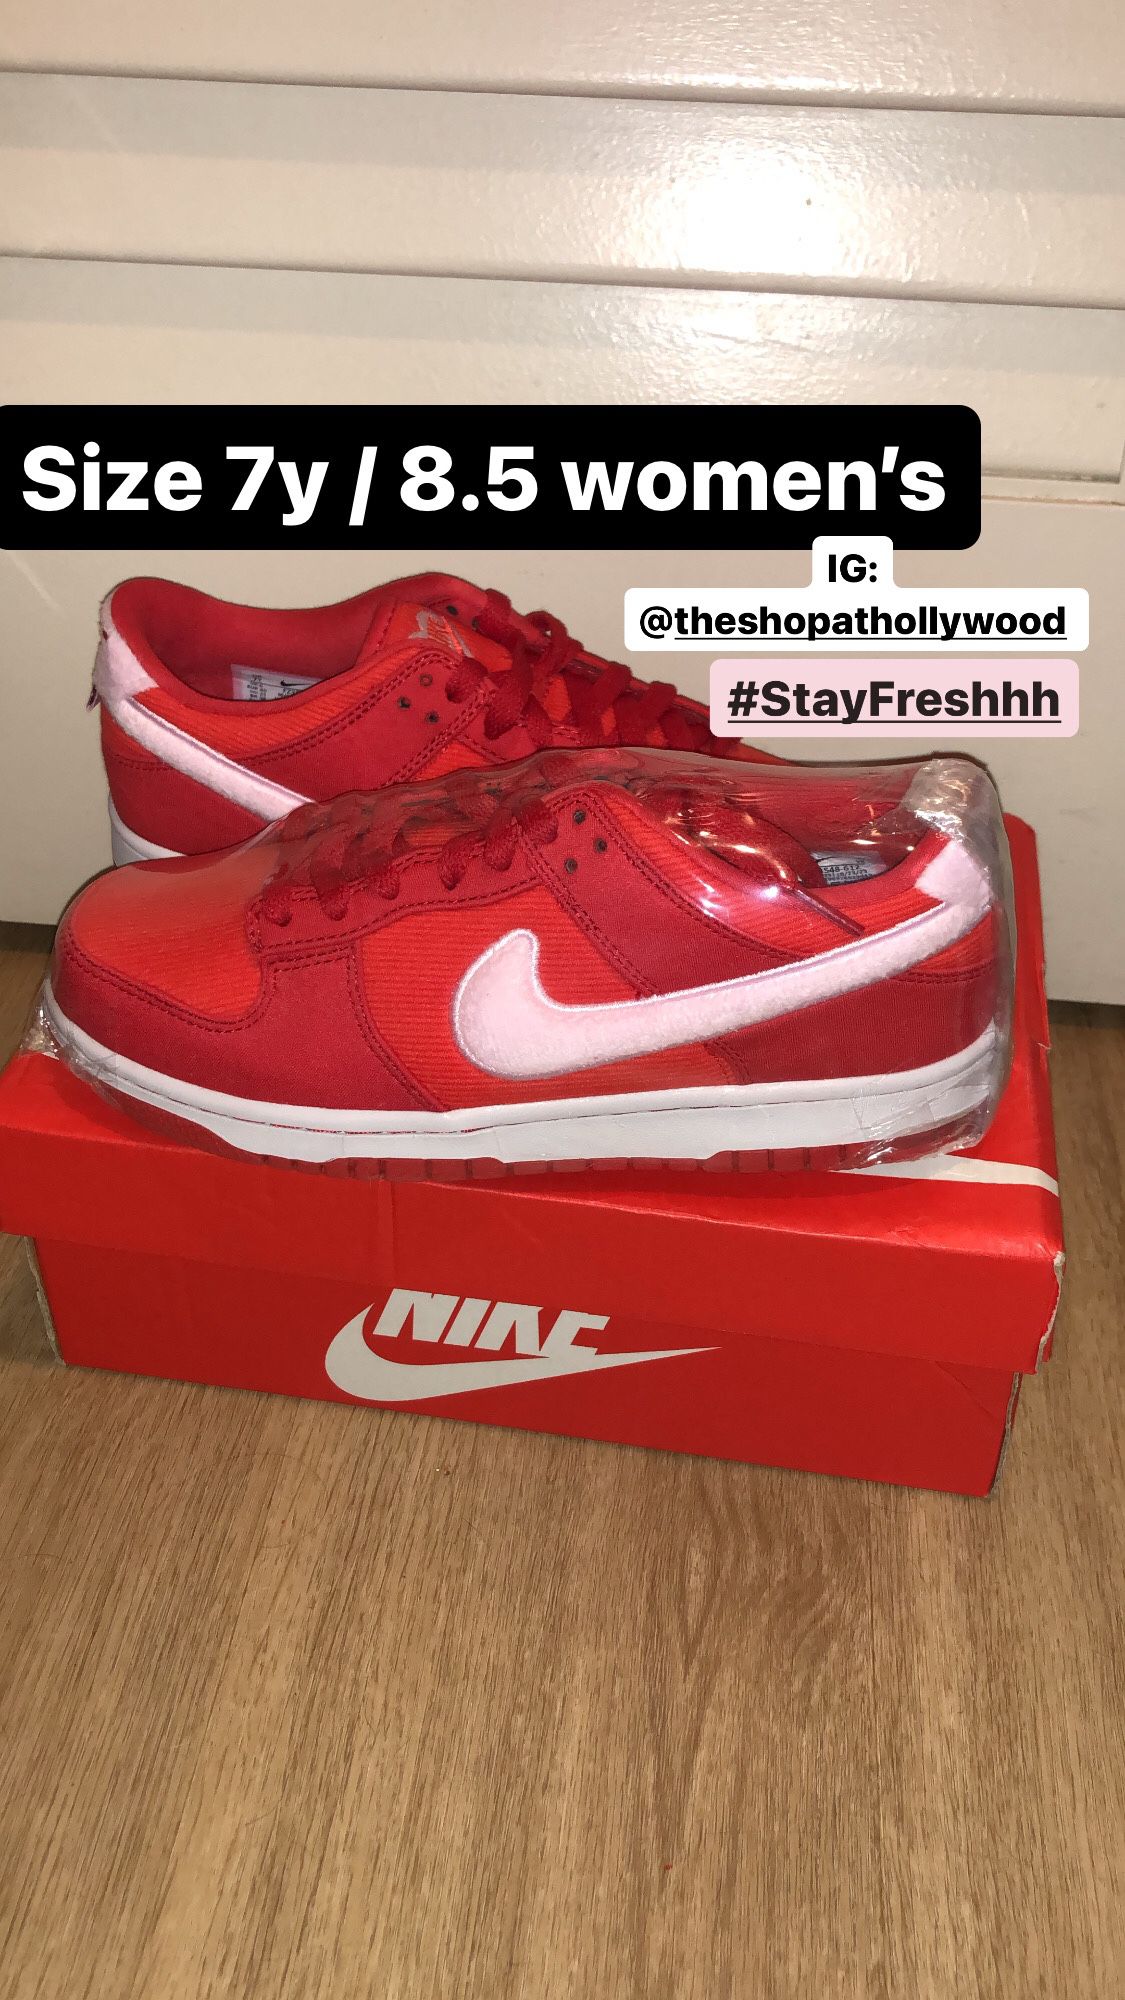 Size 7y / 8.5 Women’s Nike Dunk Low “First valentines “